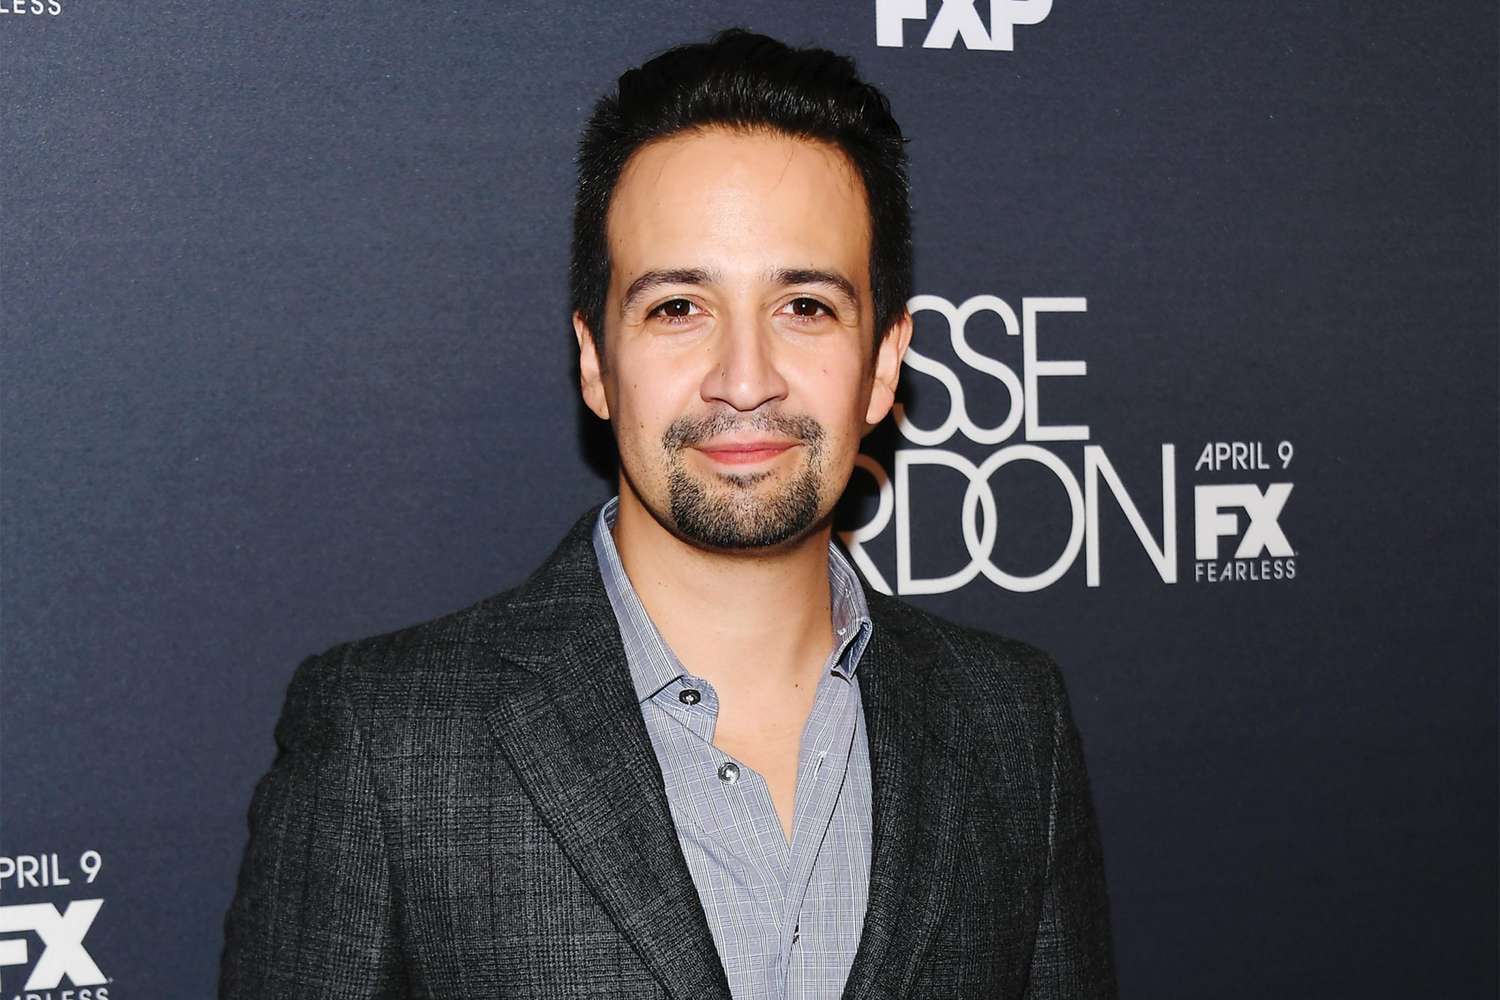 NEW YORK, NEW YORK - APRIL 08: Lin Manuel Miranda attends the New York Premiere for FX's "Fosse/Verdon" on April 08, 2019 in New York City. (Photo by Nicholas Hunt/WireImage,)